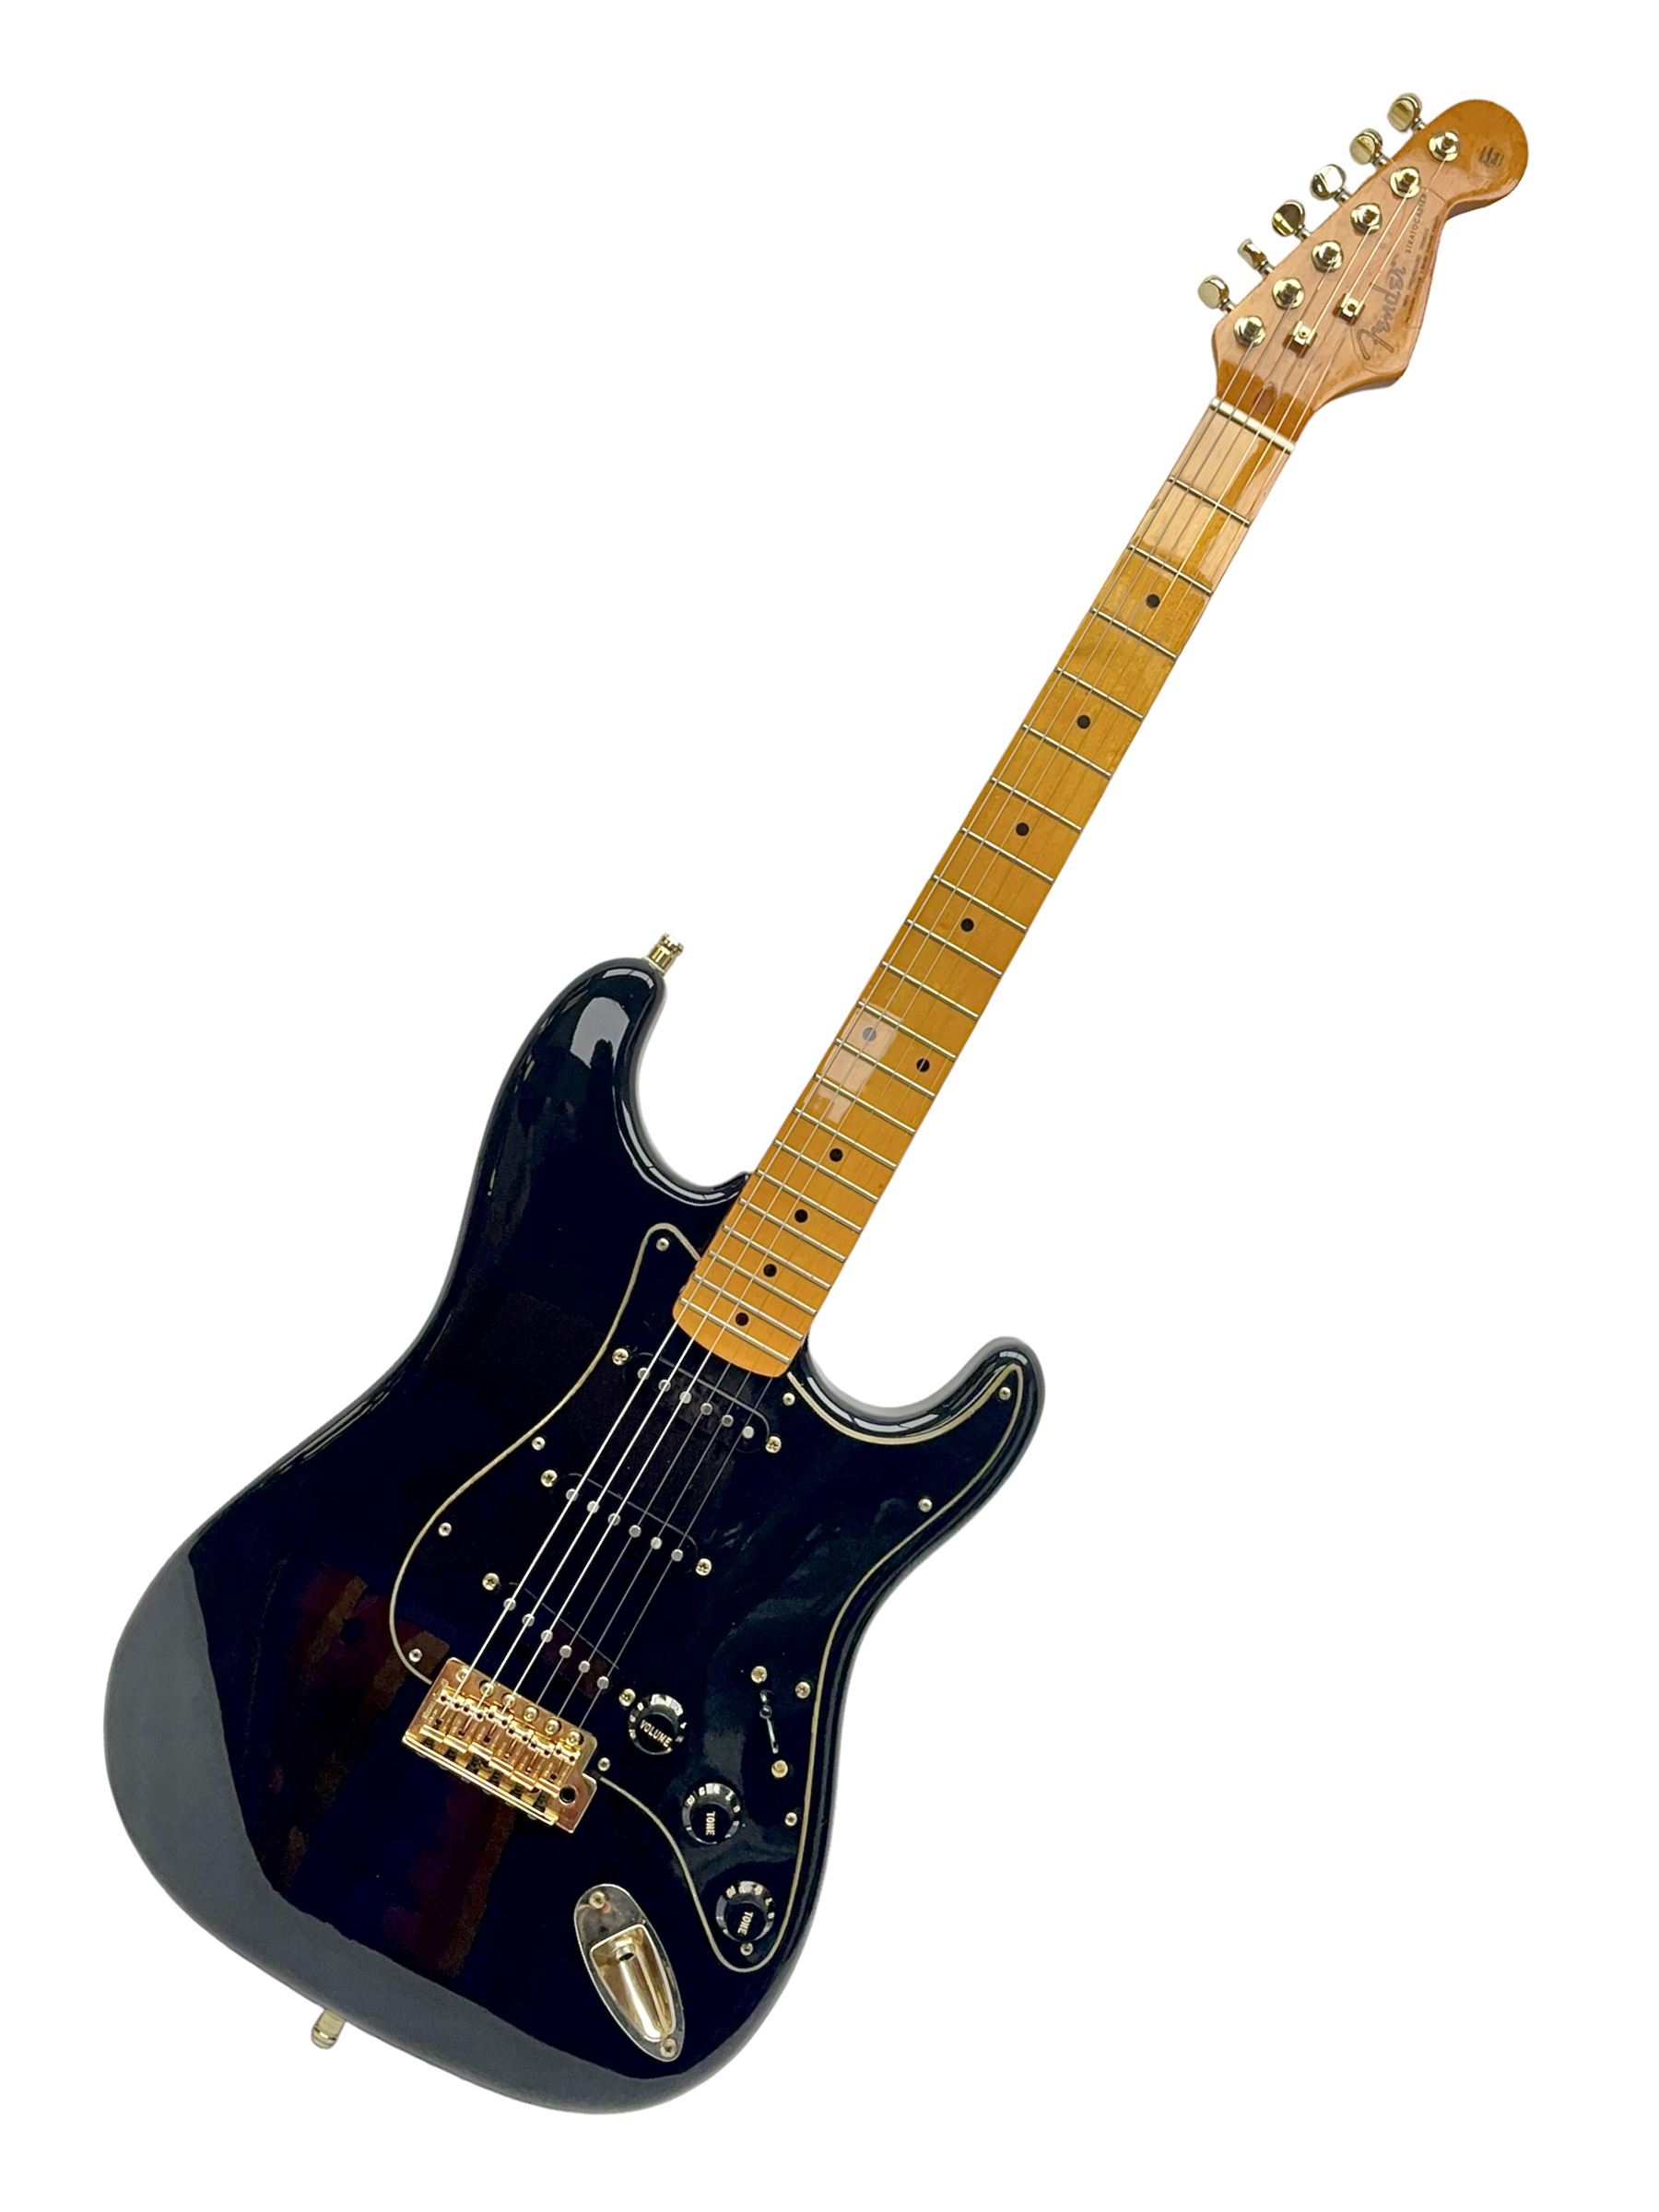 Copy of a Fender Stratocaster electric guitar in black with Wilkinson bridge